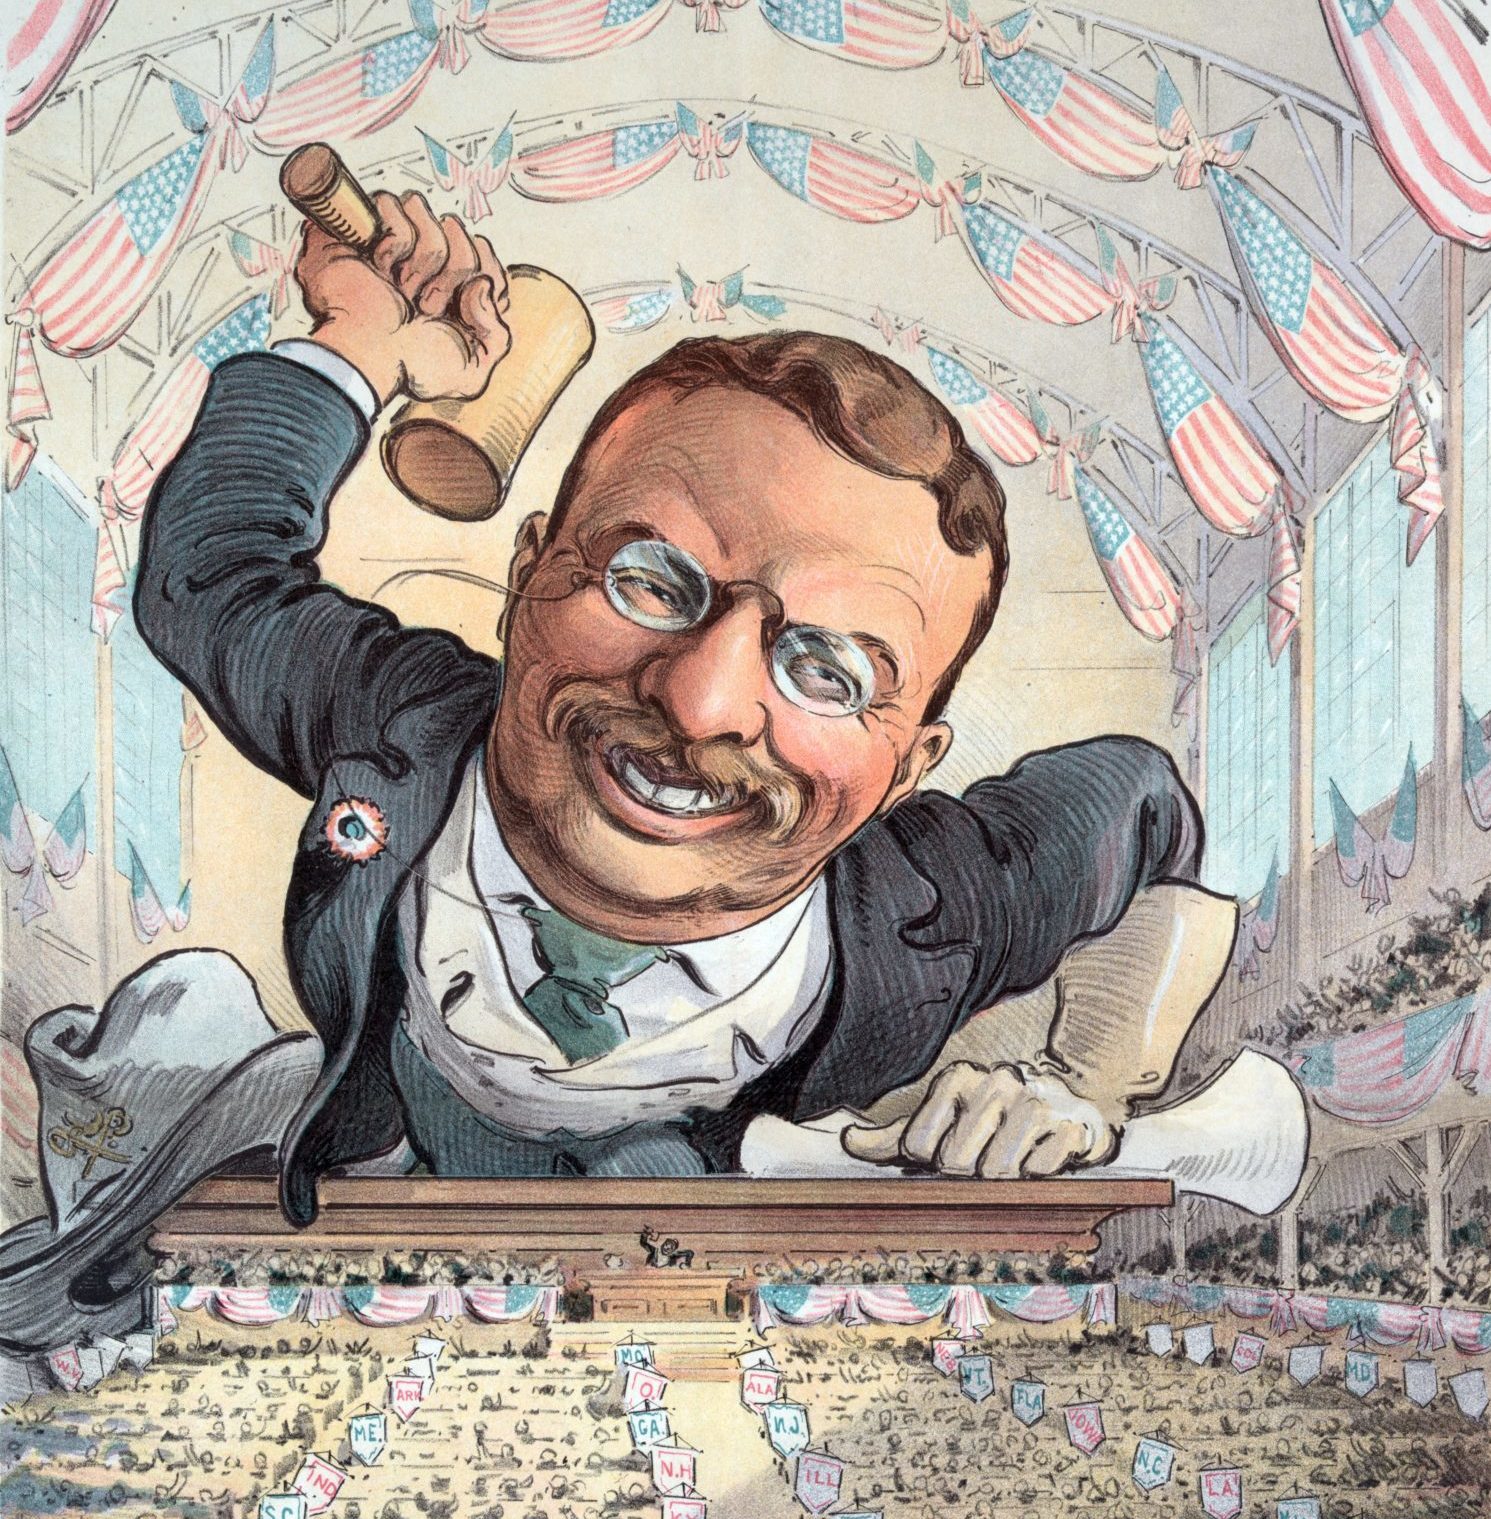 Heroic Materialism: A Review of Joshua Hawley’s Theodore Roosevelt: Preacher of Righteousness